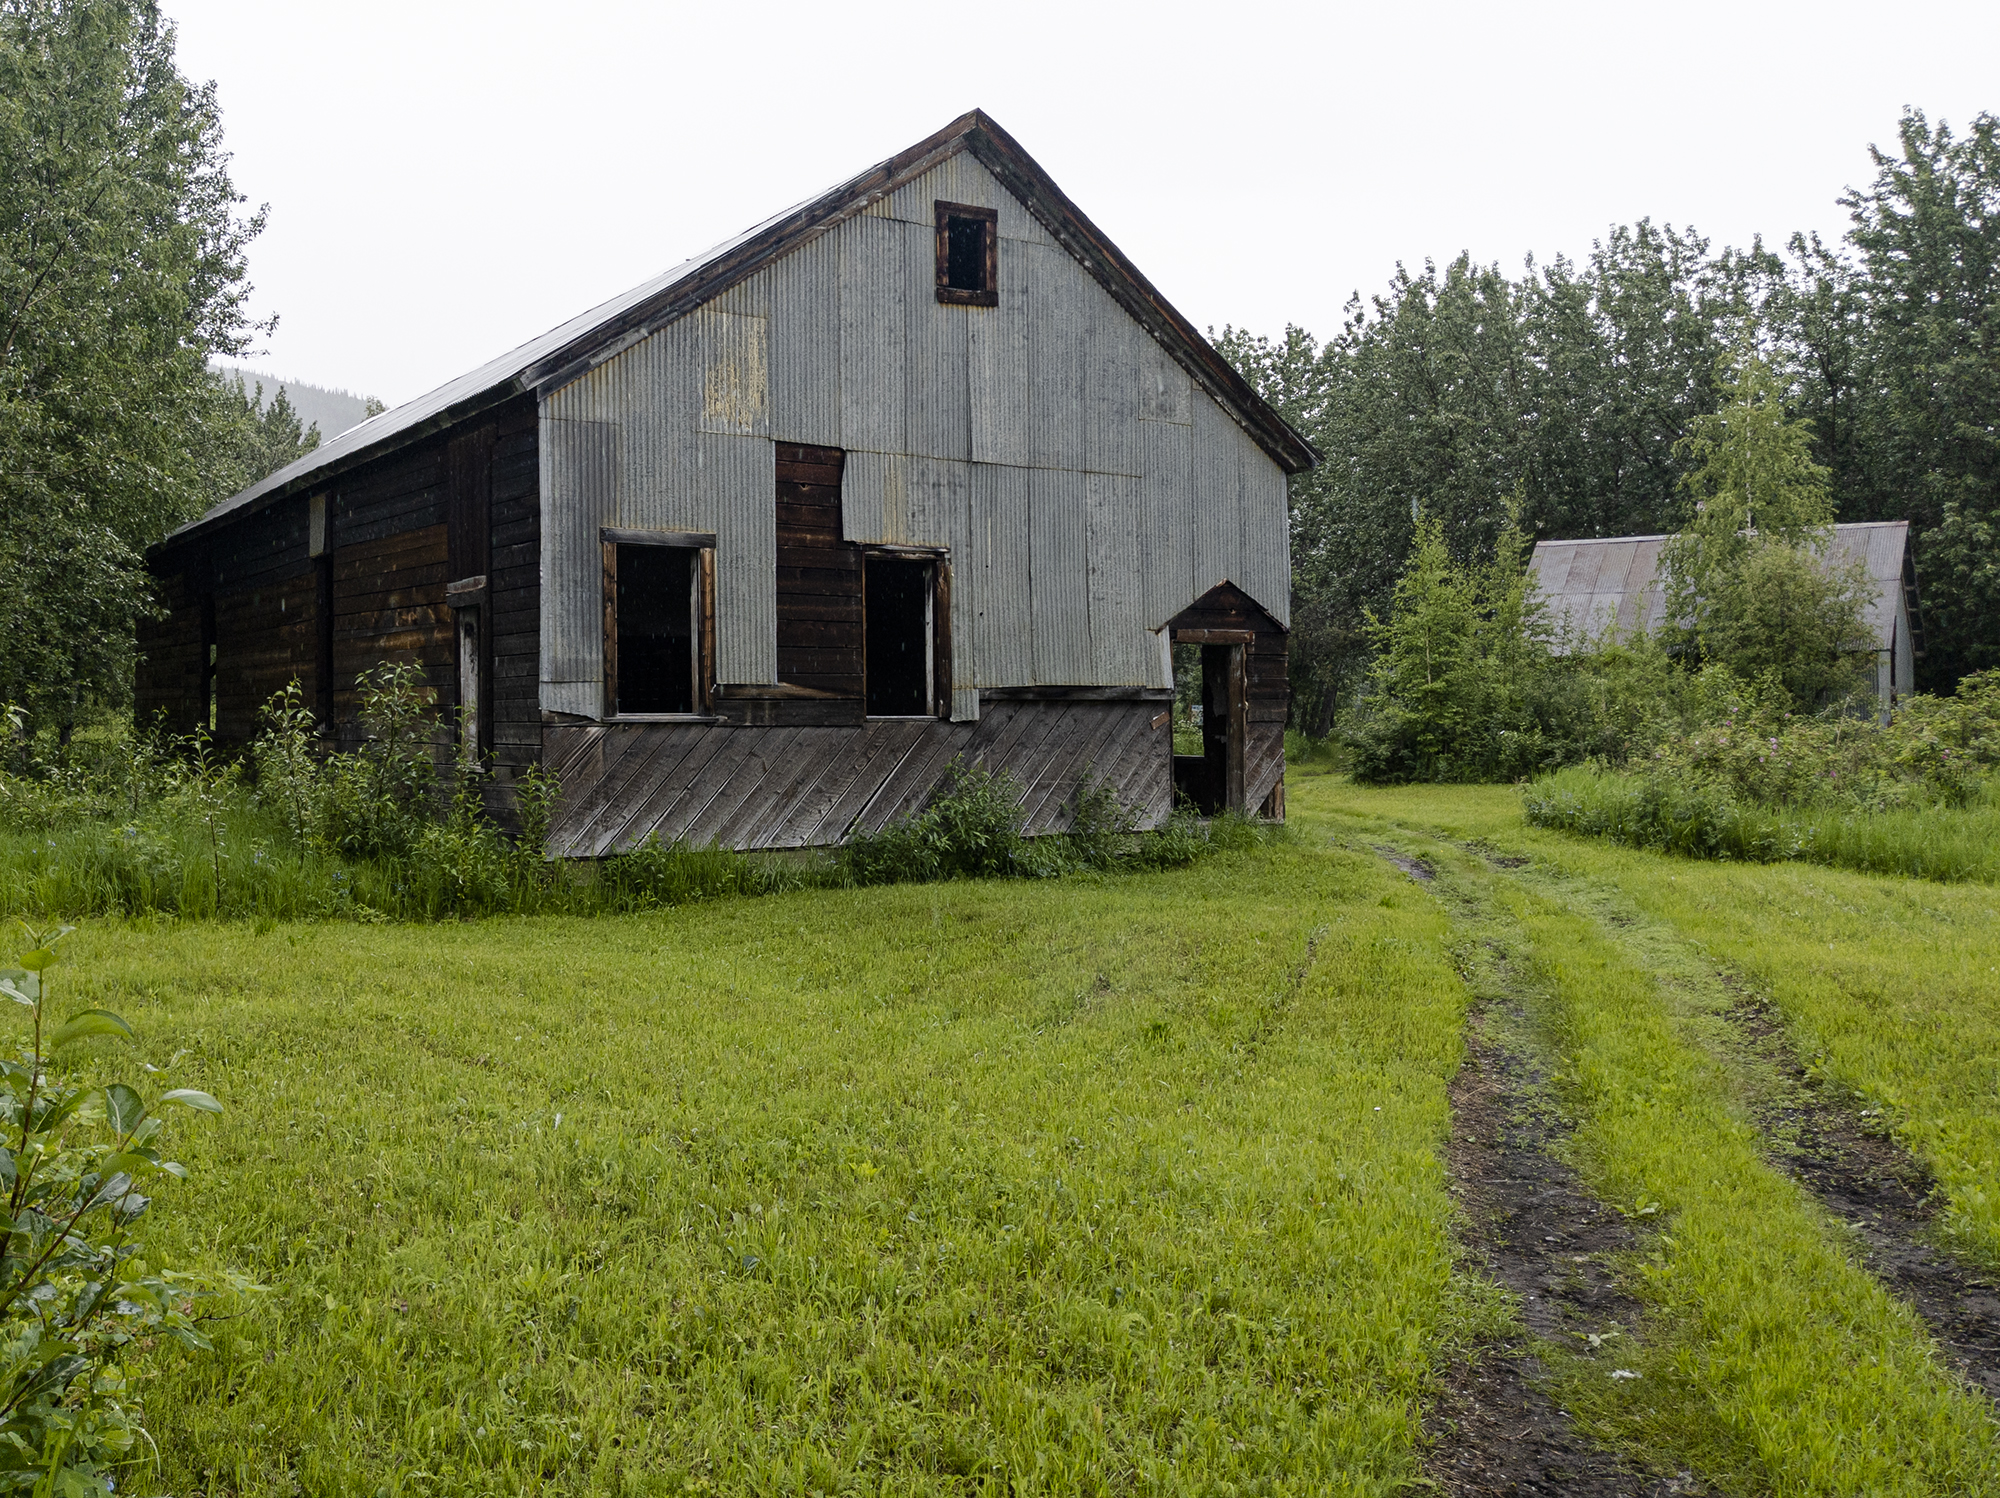 The AC Co. store and warehouse in the Forty Mile townsite in Yukon, pictured on June 21, 2020. (Steve Silva)